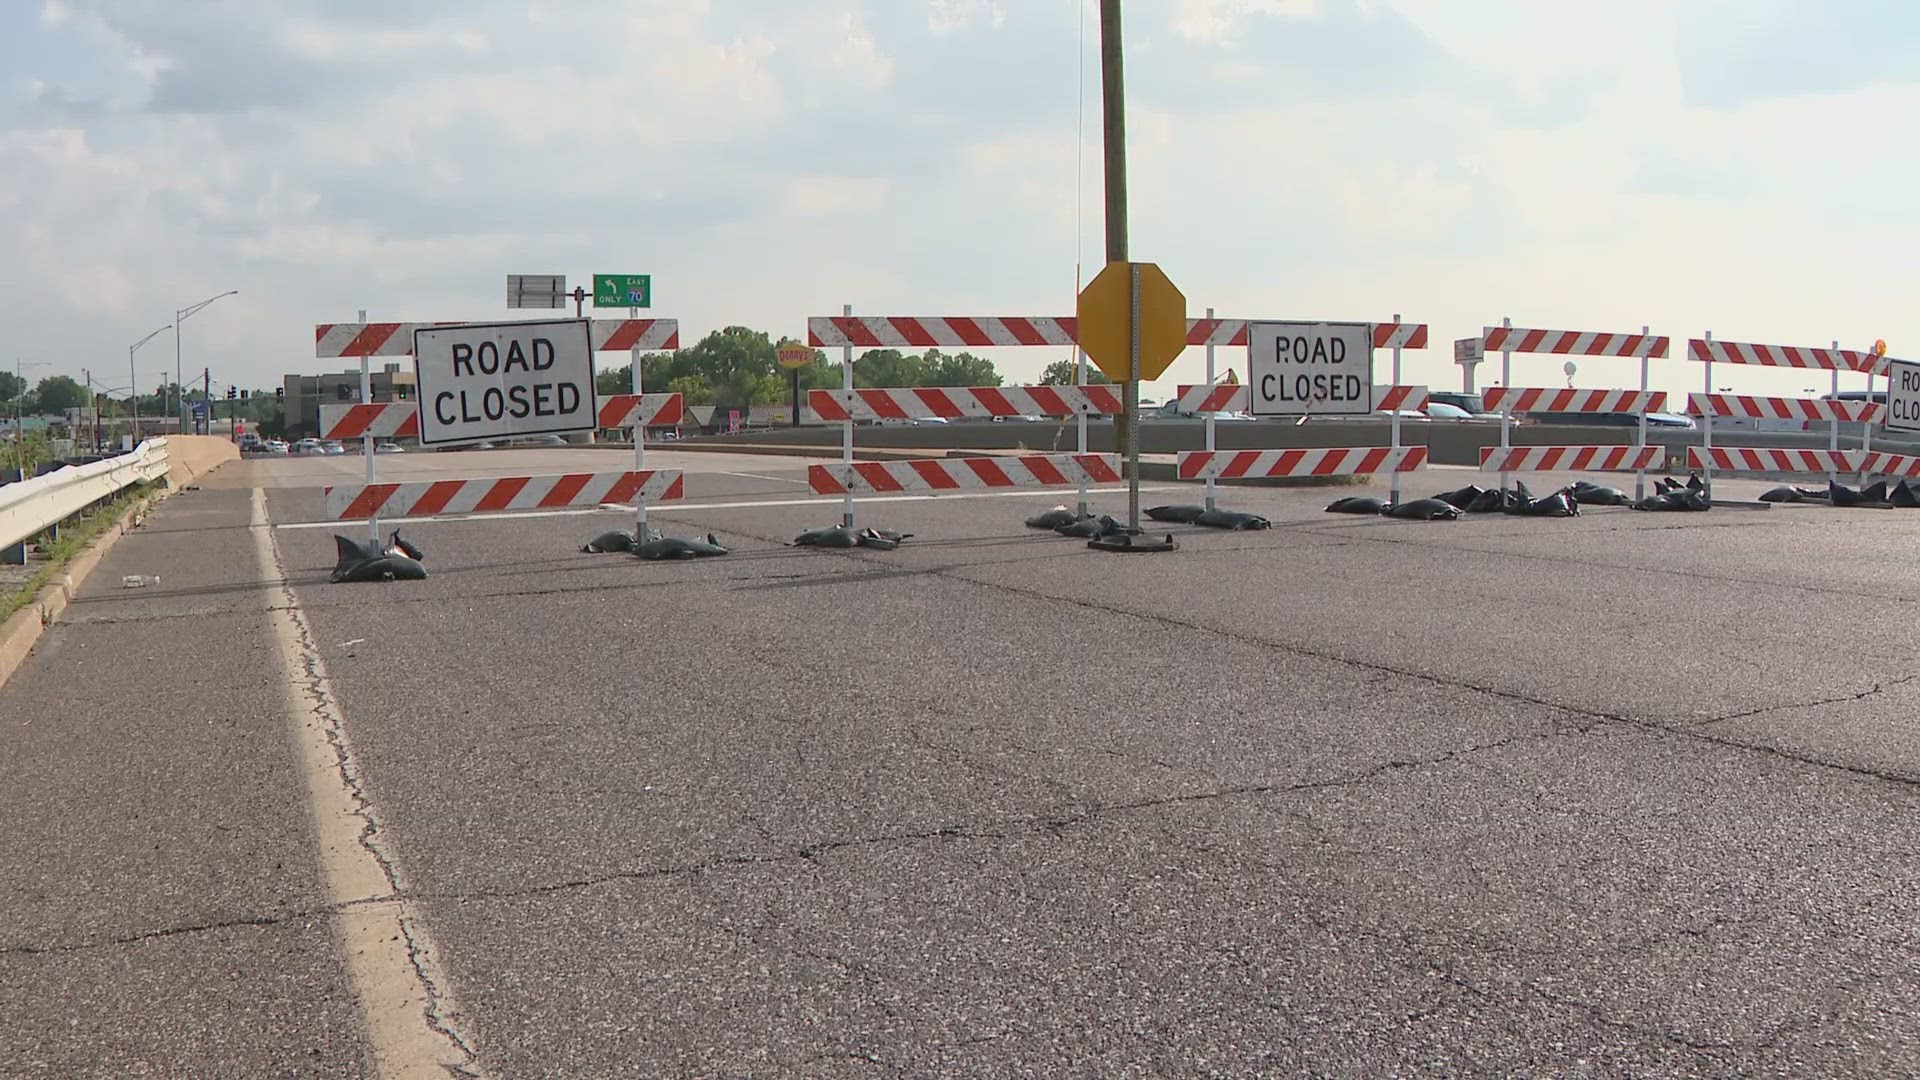 Interstate 70 Cave Springs exit in St. Charles County expected to close in 24-hours. The closure is due to MoDOT repairs and construction needs.